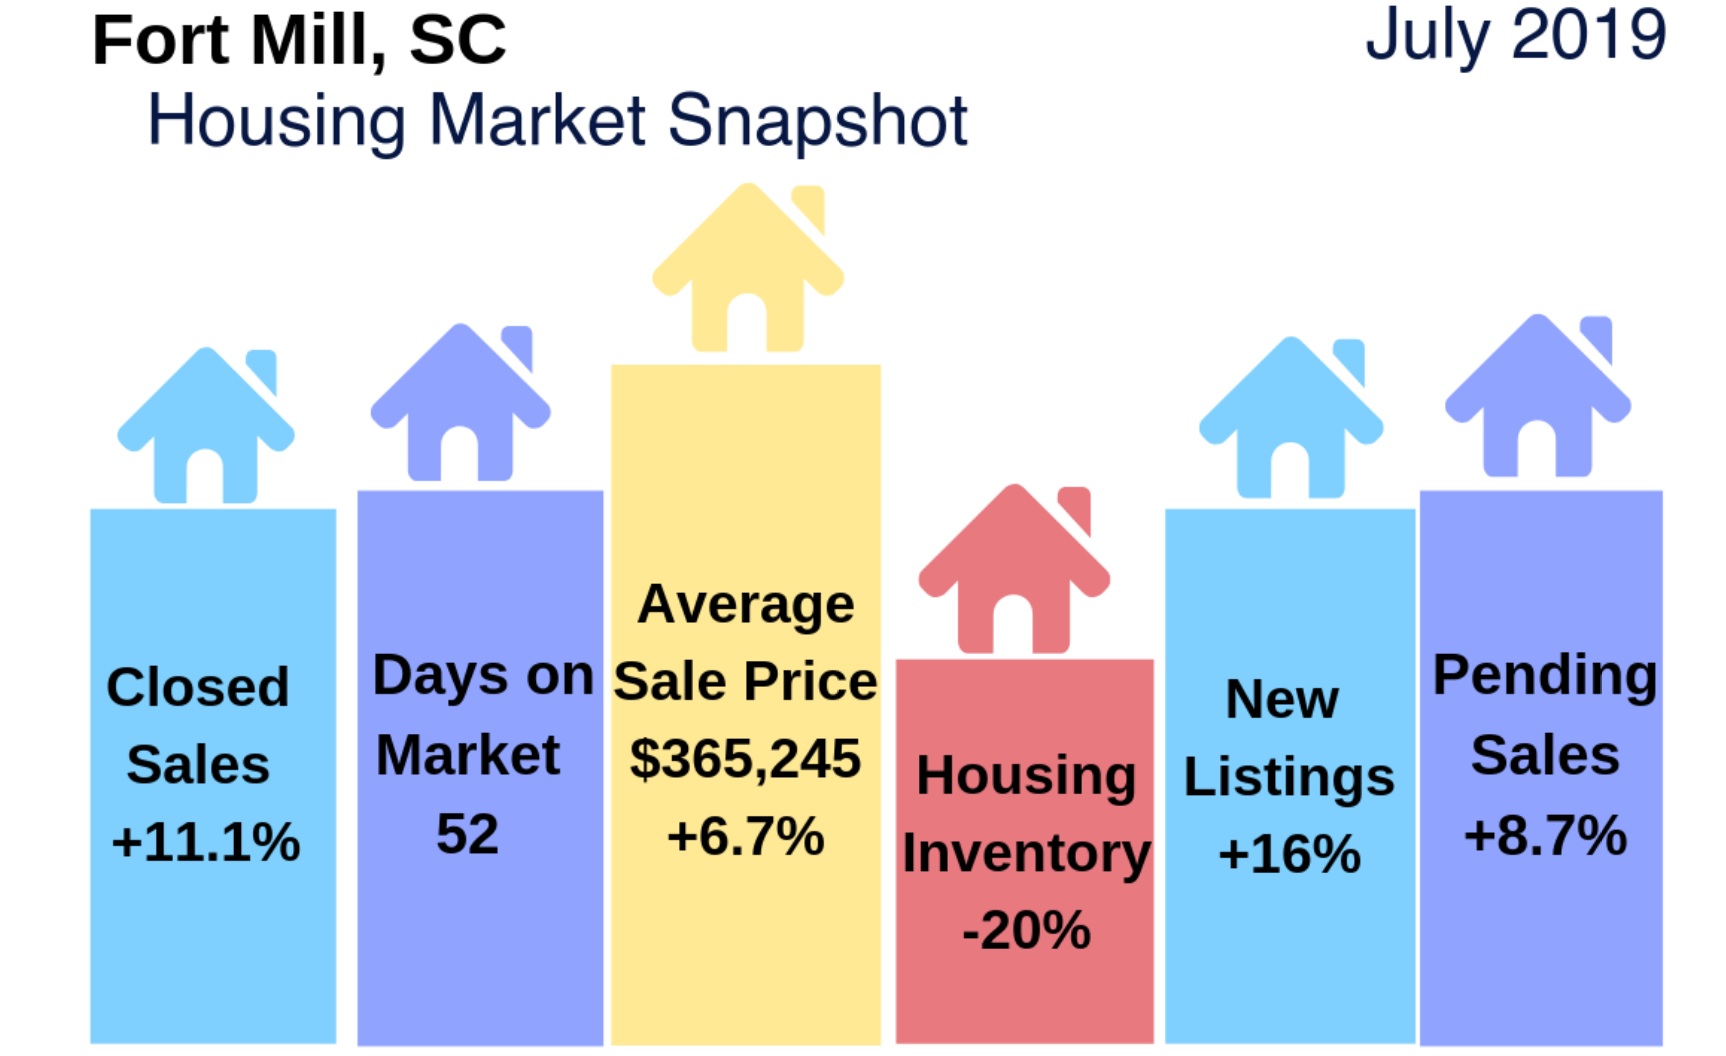 Fort Mill/Tega Cay Housing Markets: July 2019. How Did They Do?